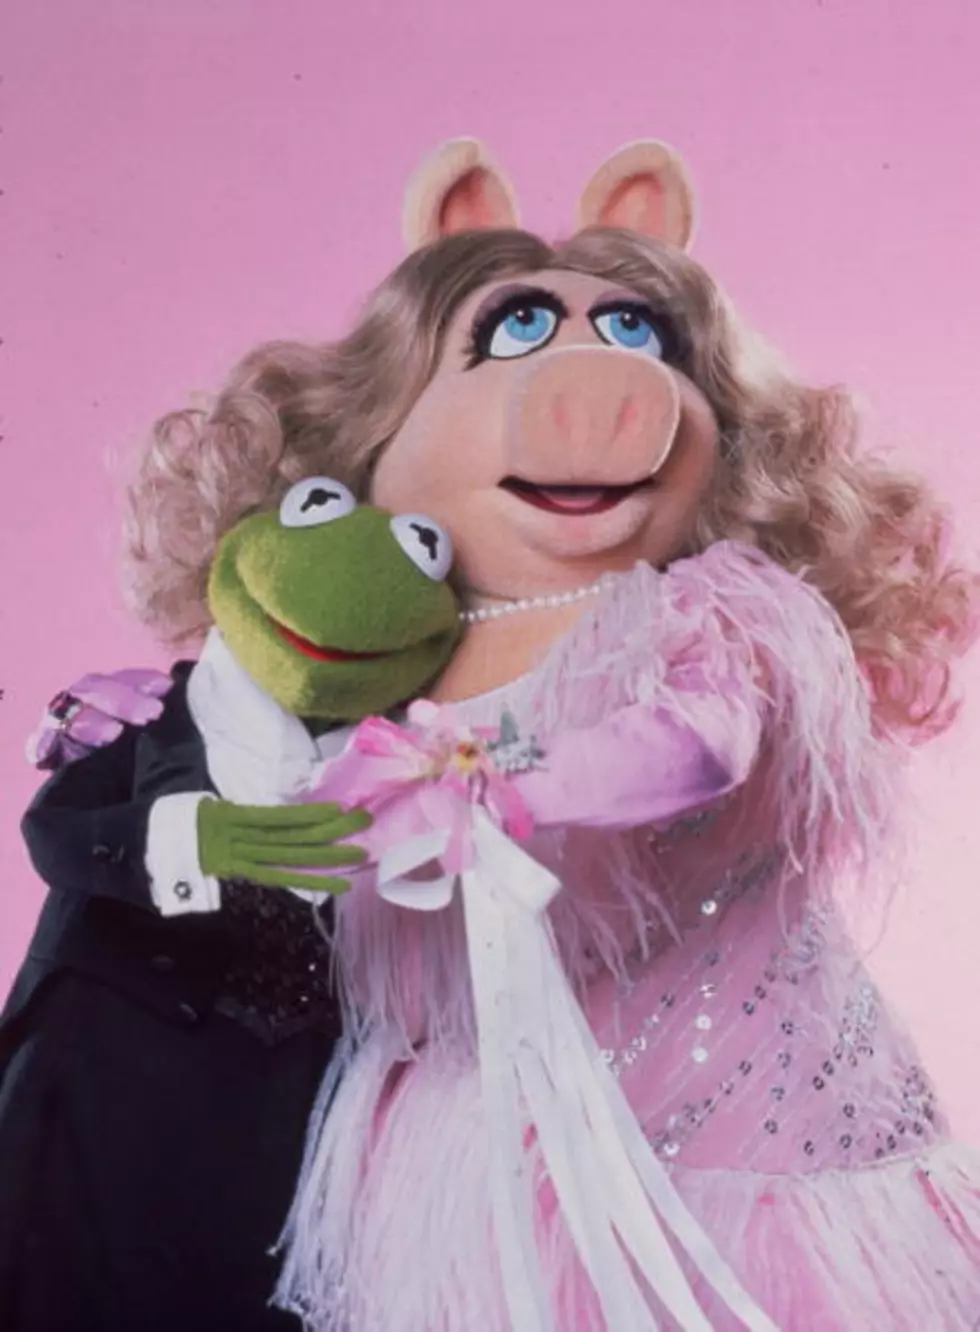 &#8216;The Muppets&#8217; A&#8217;cappella Version of &#8216;Cool Kids&#8217; By Echosmith [VIDEO]